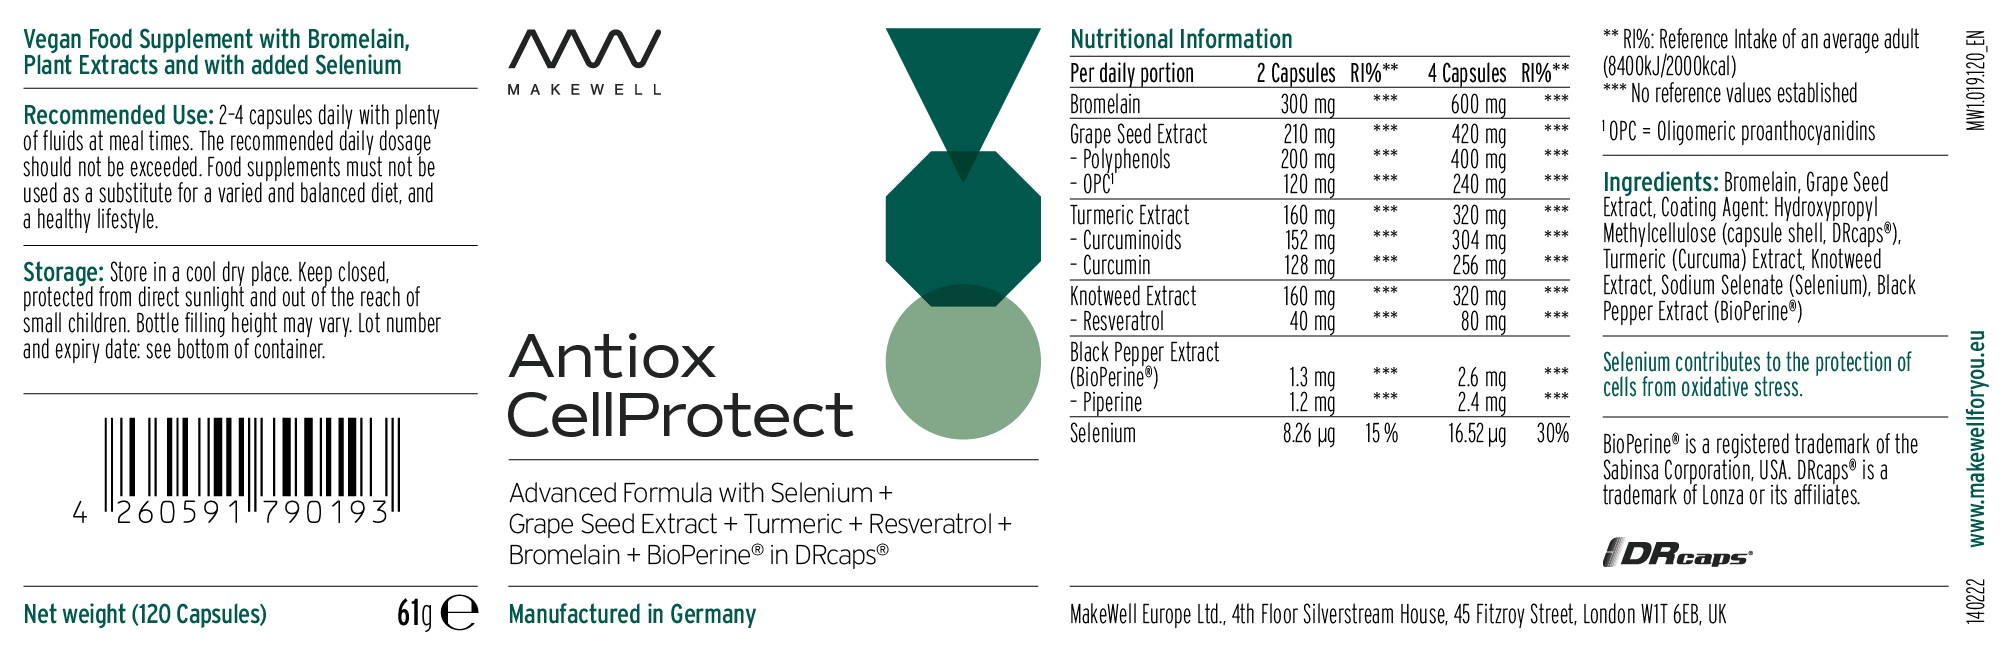 Antiox CellProtect - 120 Capsules | Anti-Inflammation Formula | MakeWell